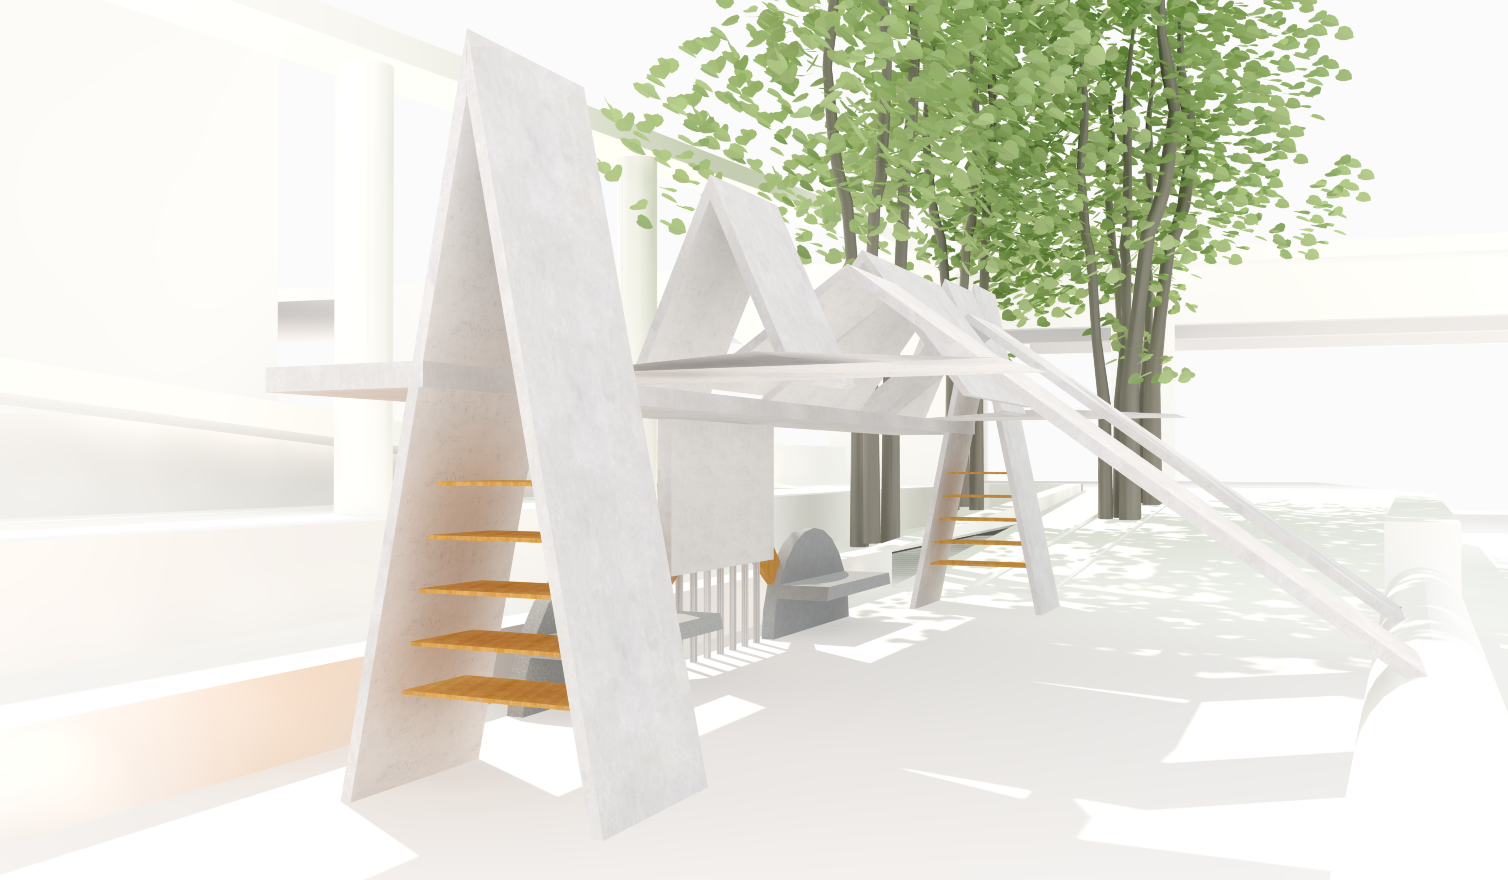 image of student work site model by dautrich